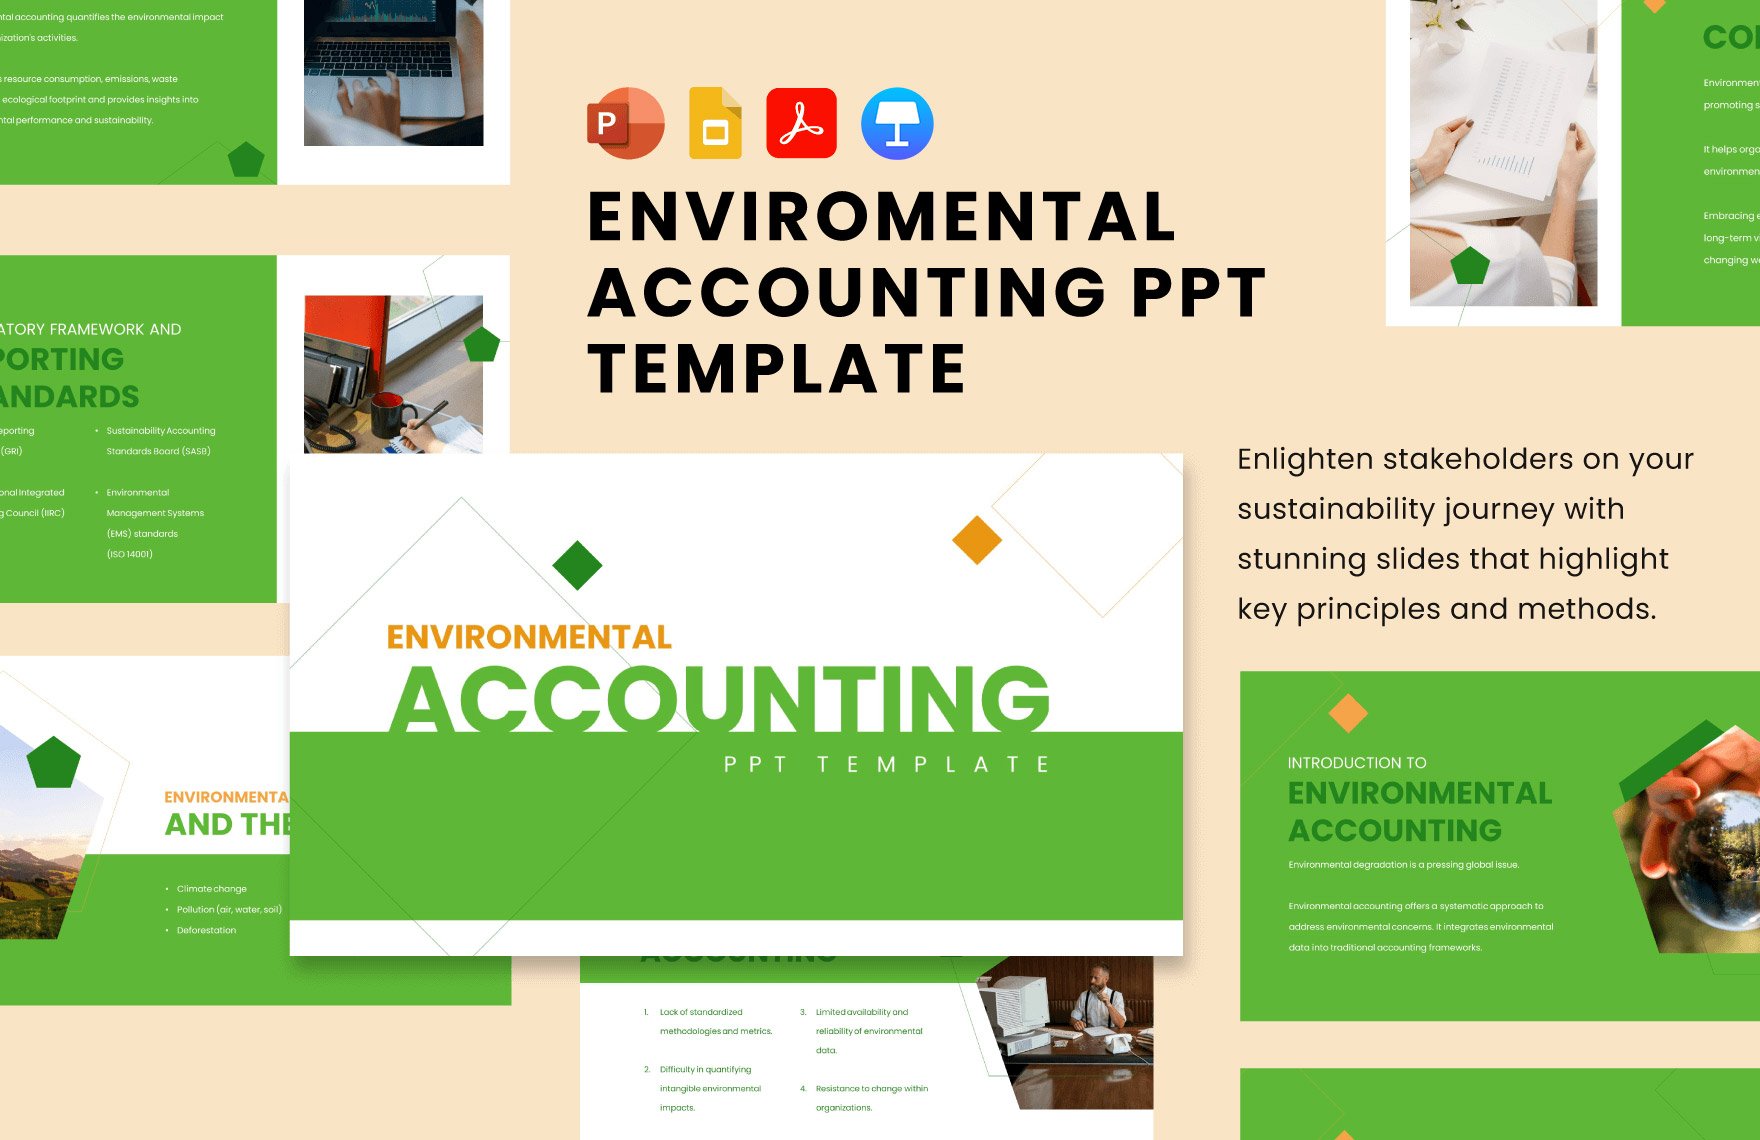 Environmental Accounting PPT Template in PDF, PowerPoint, Google Slides, Apple Keynote